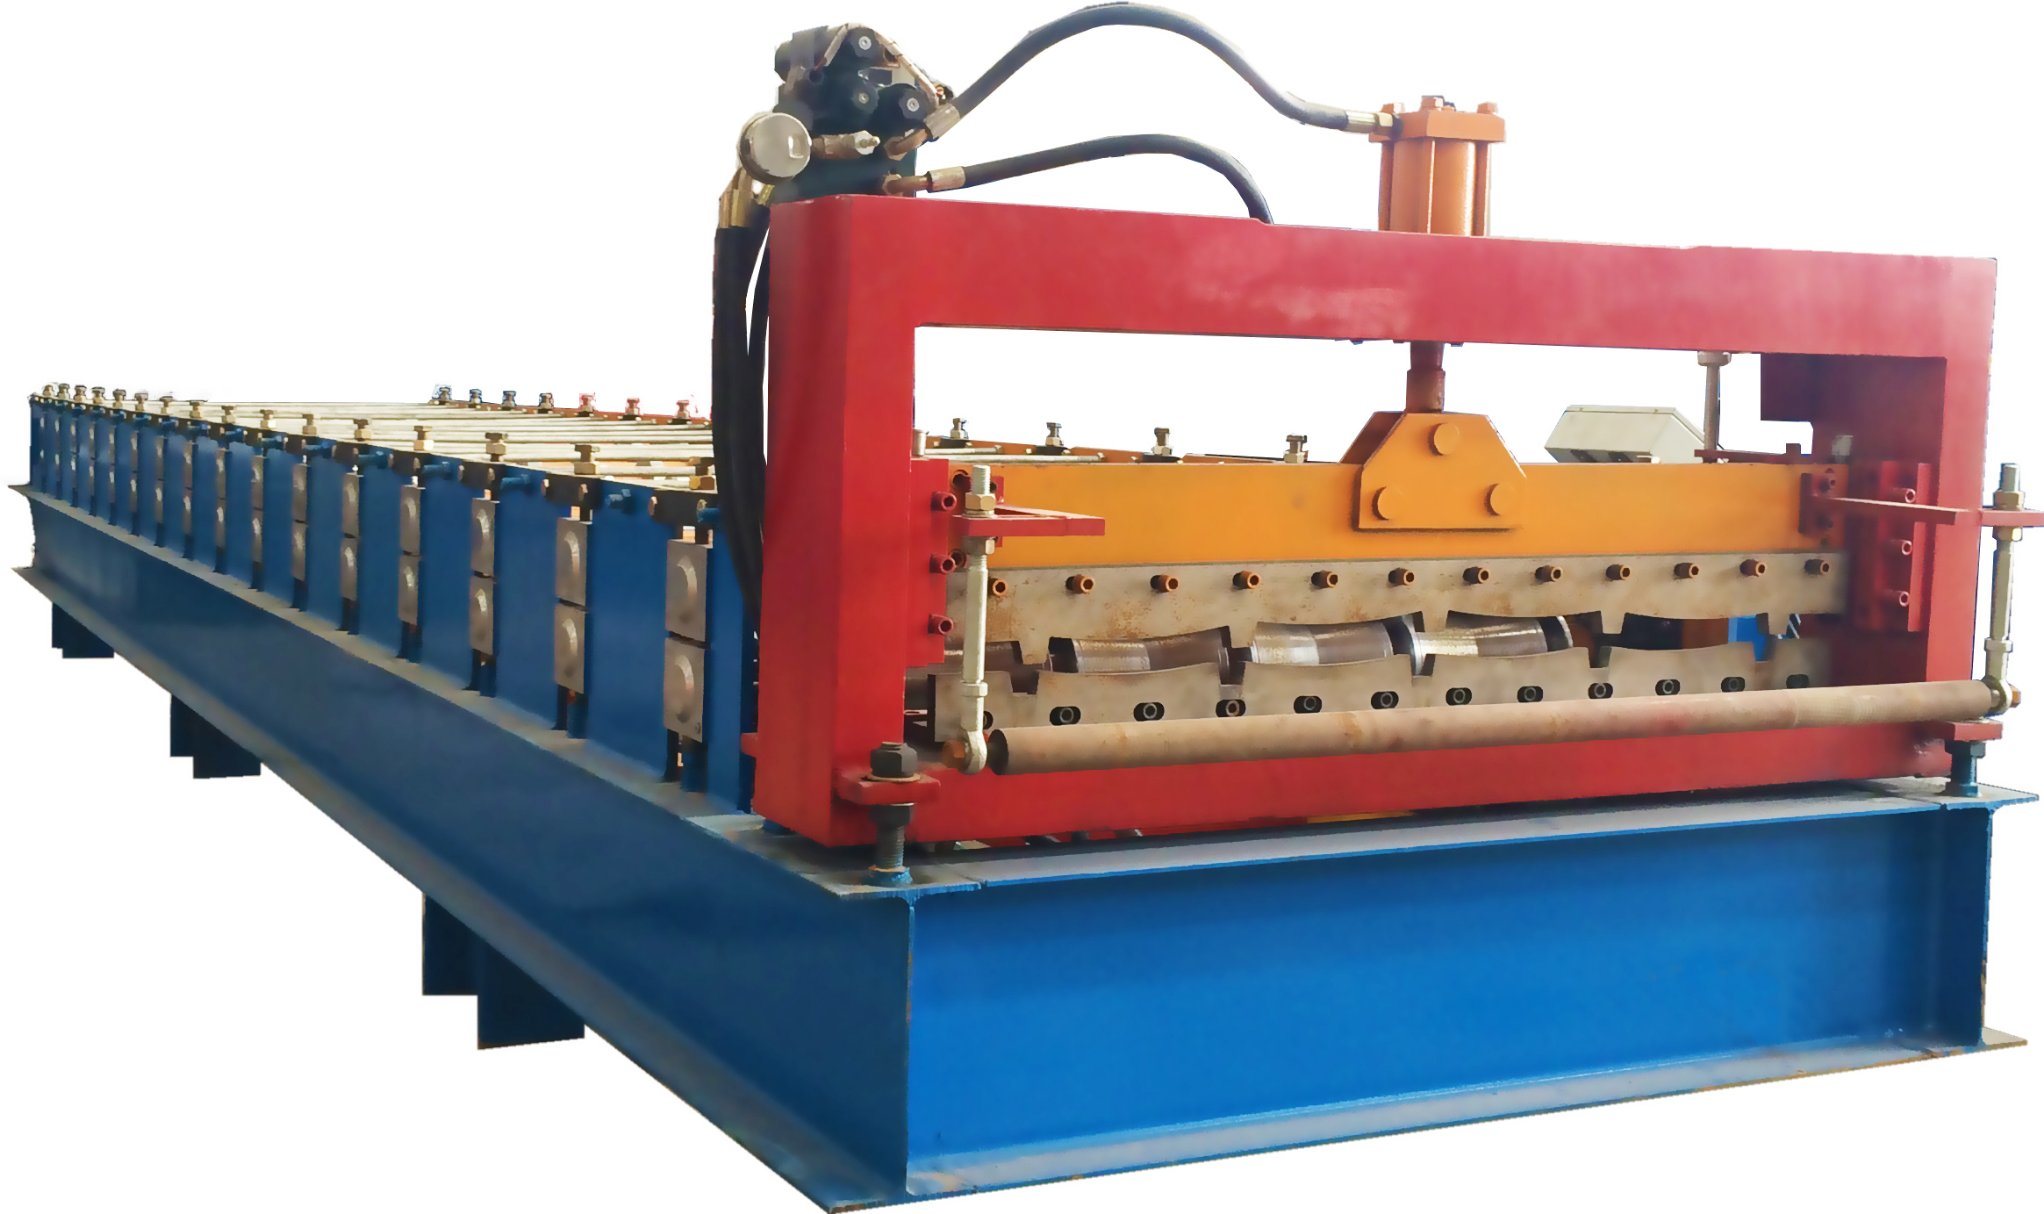 Full Automatic Metal Roof Sheet Roll Forming Machine for Sale